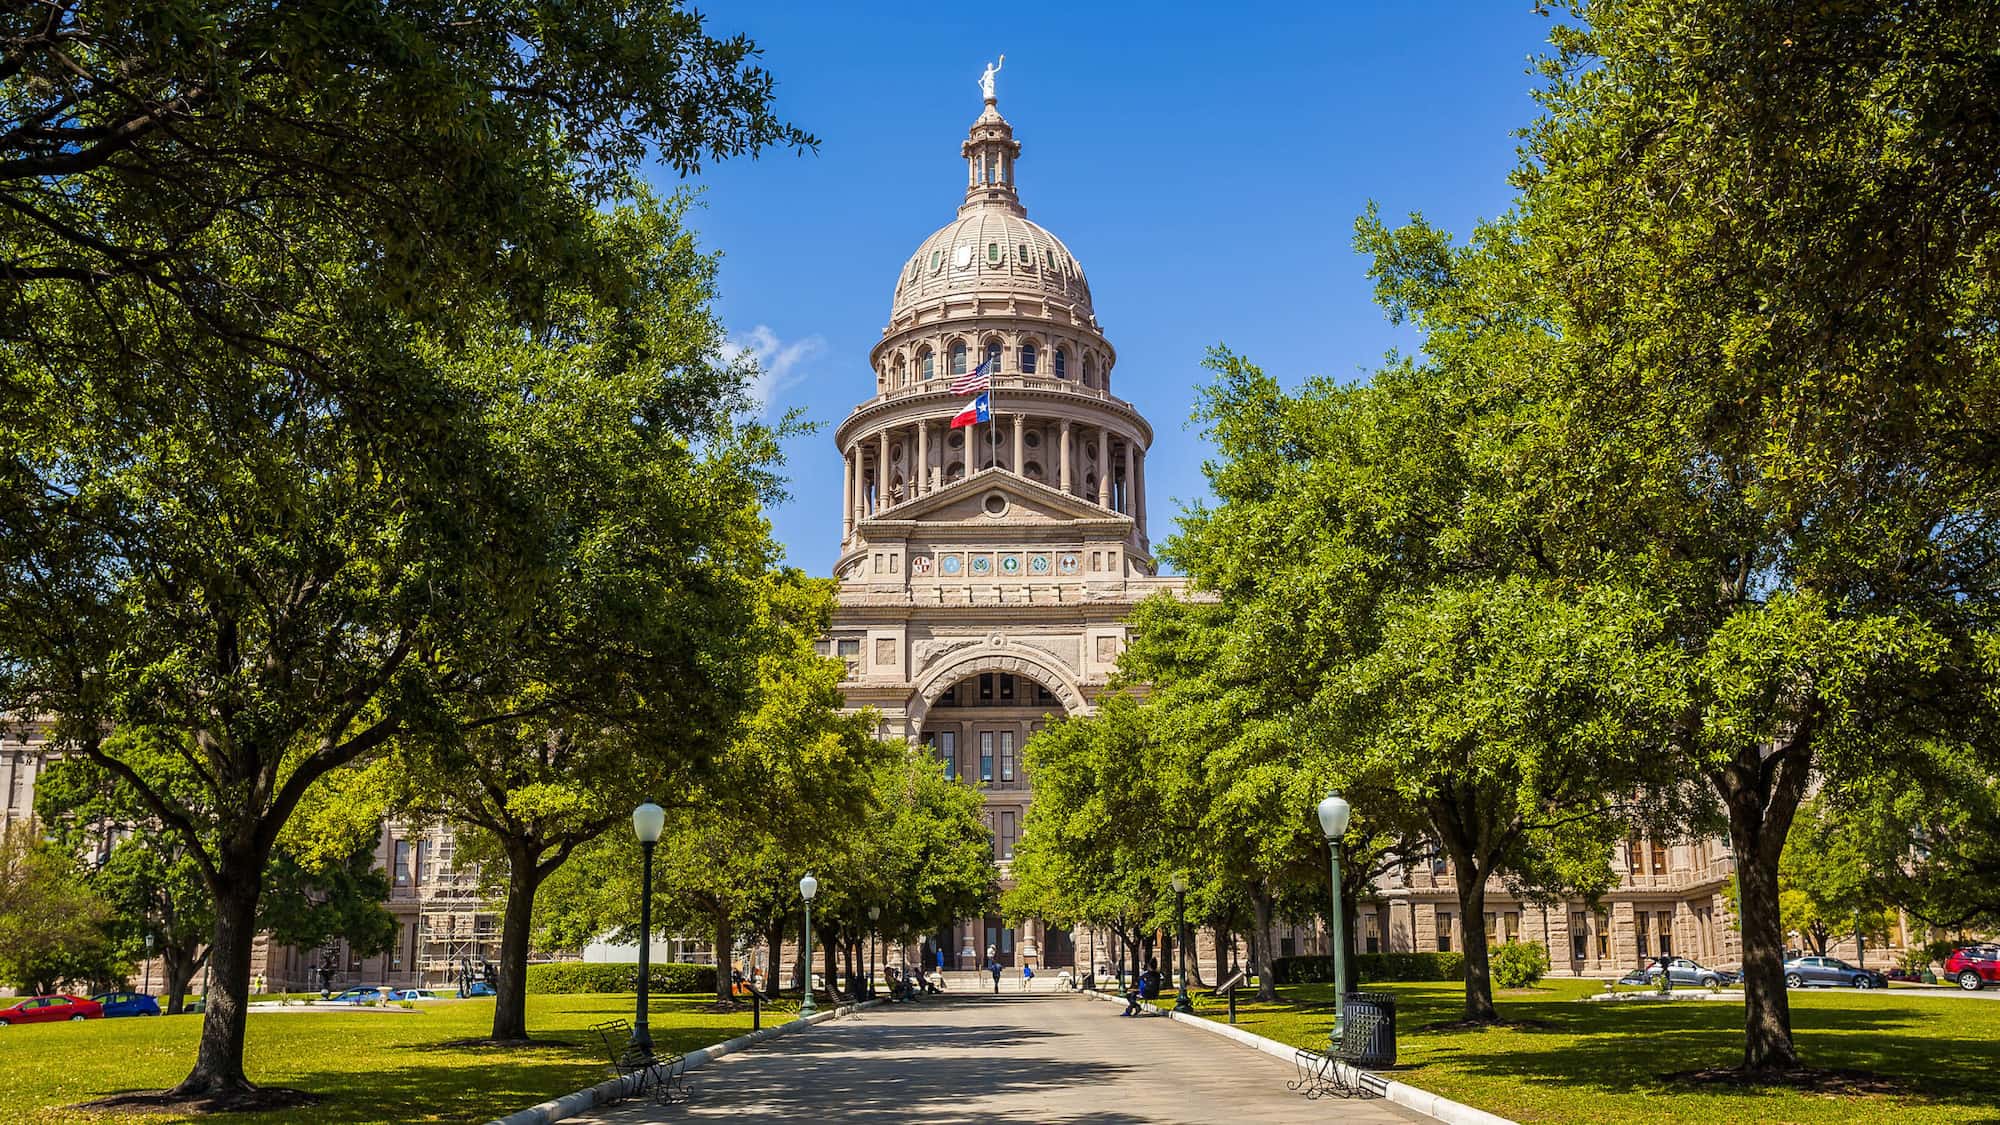 The capital building in Austin, TX, at the end of a lane lined with trees, near where Austin Landmark Property Services manages rental homes for tenants